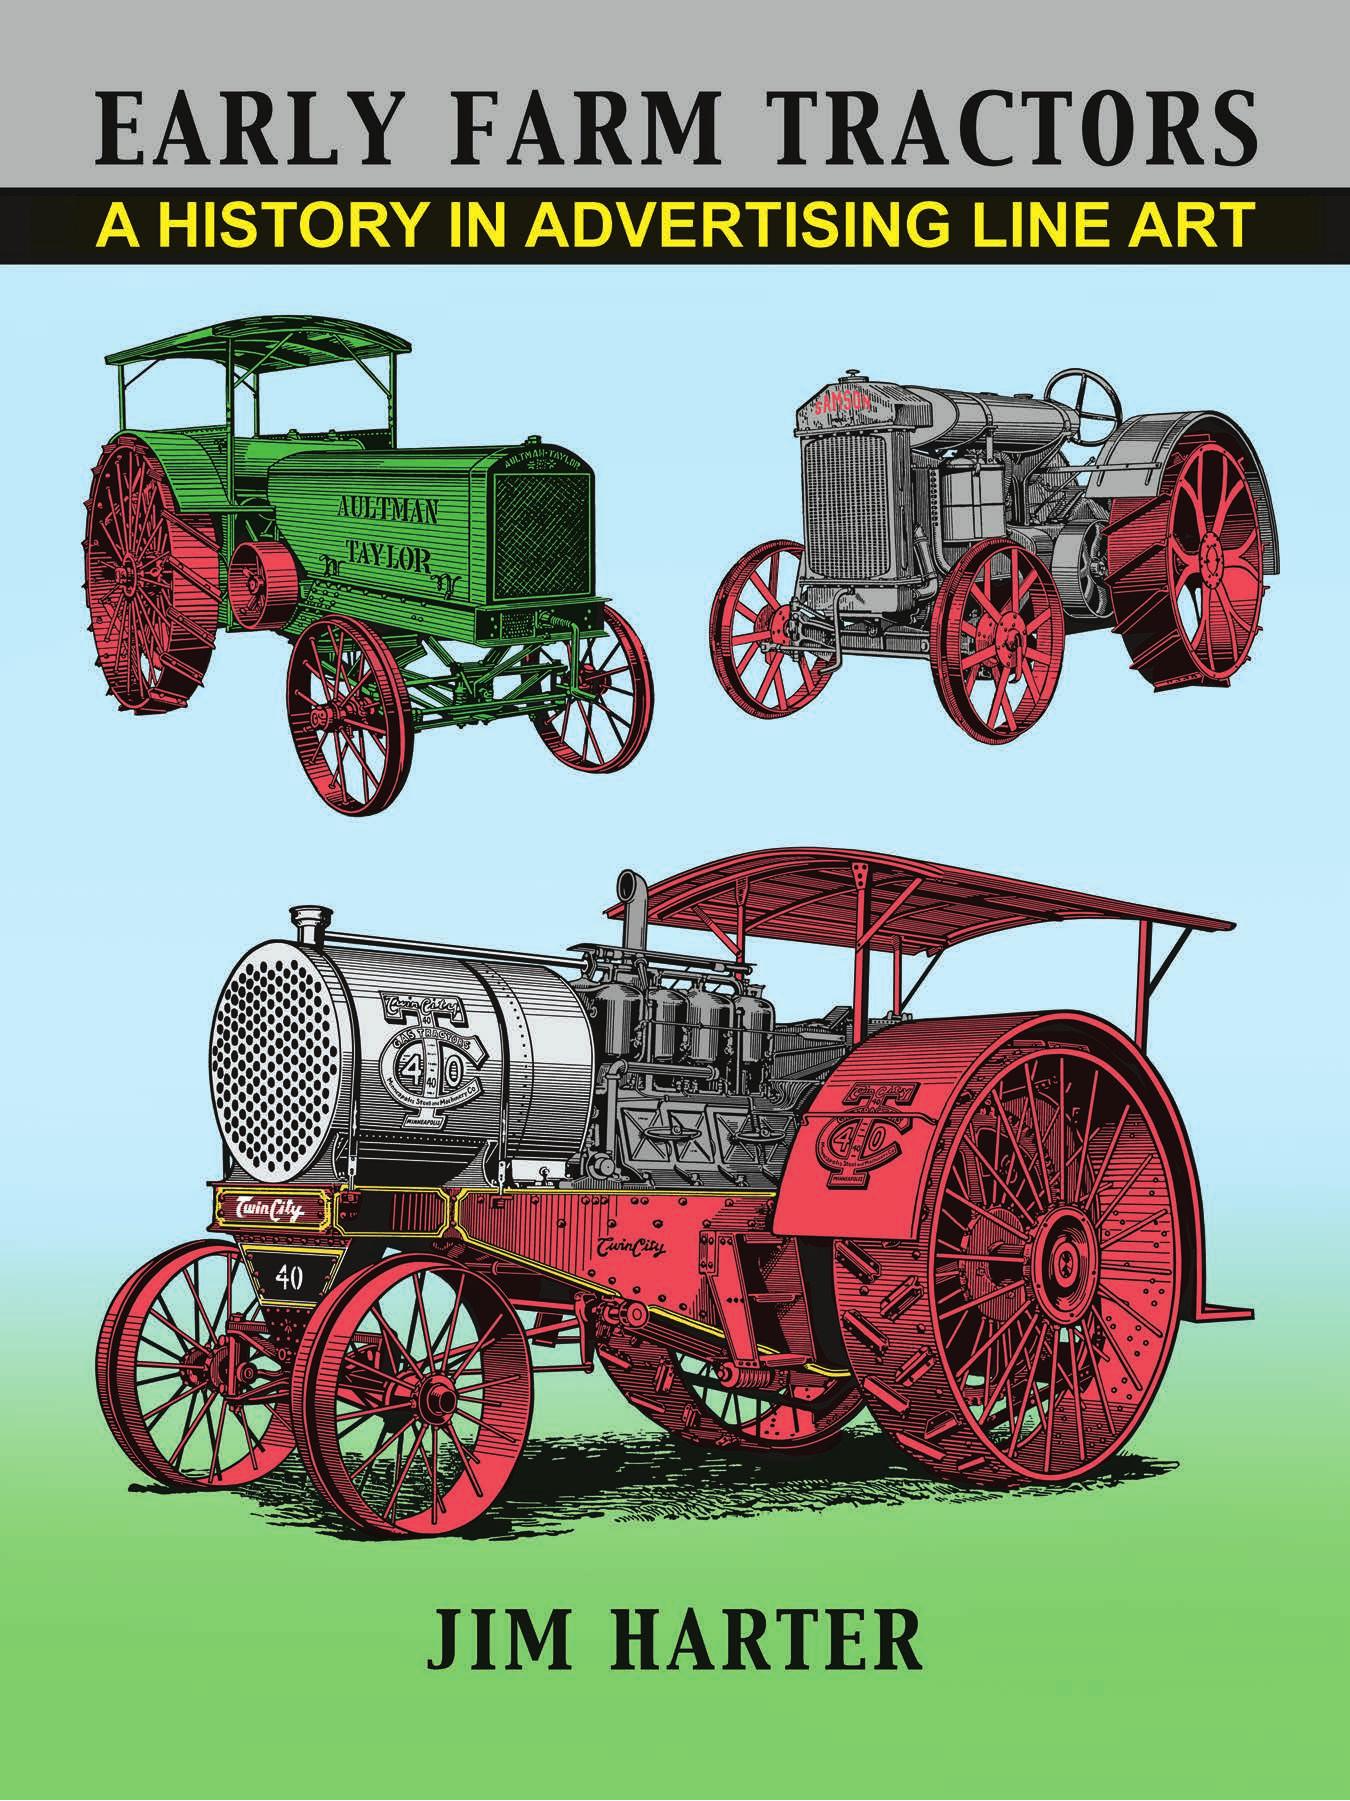 Early Farm Tractors: A History in Advertising Line Art by Jim Harter